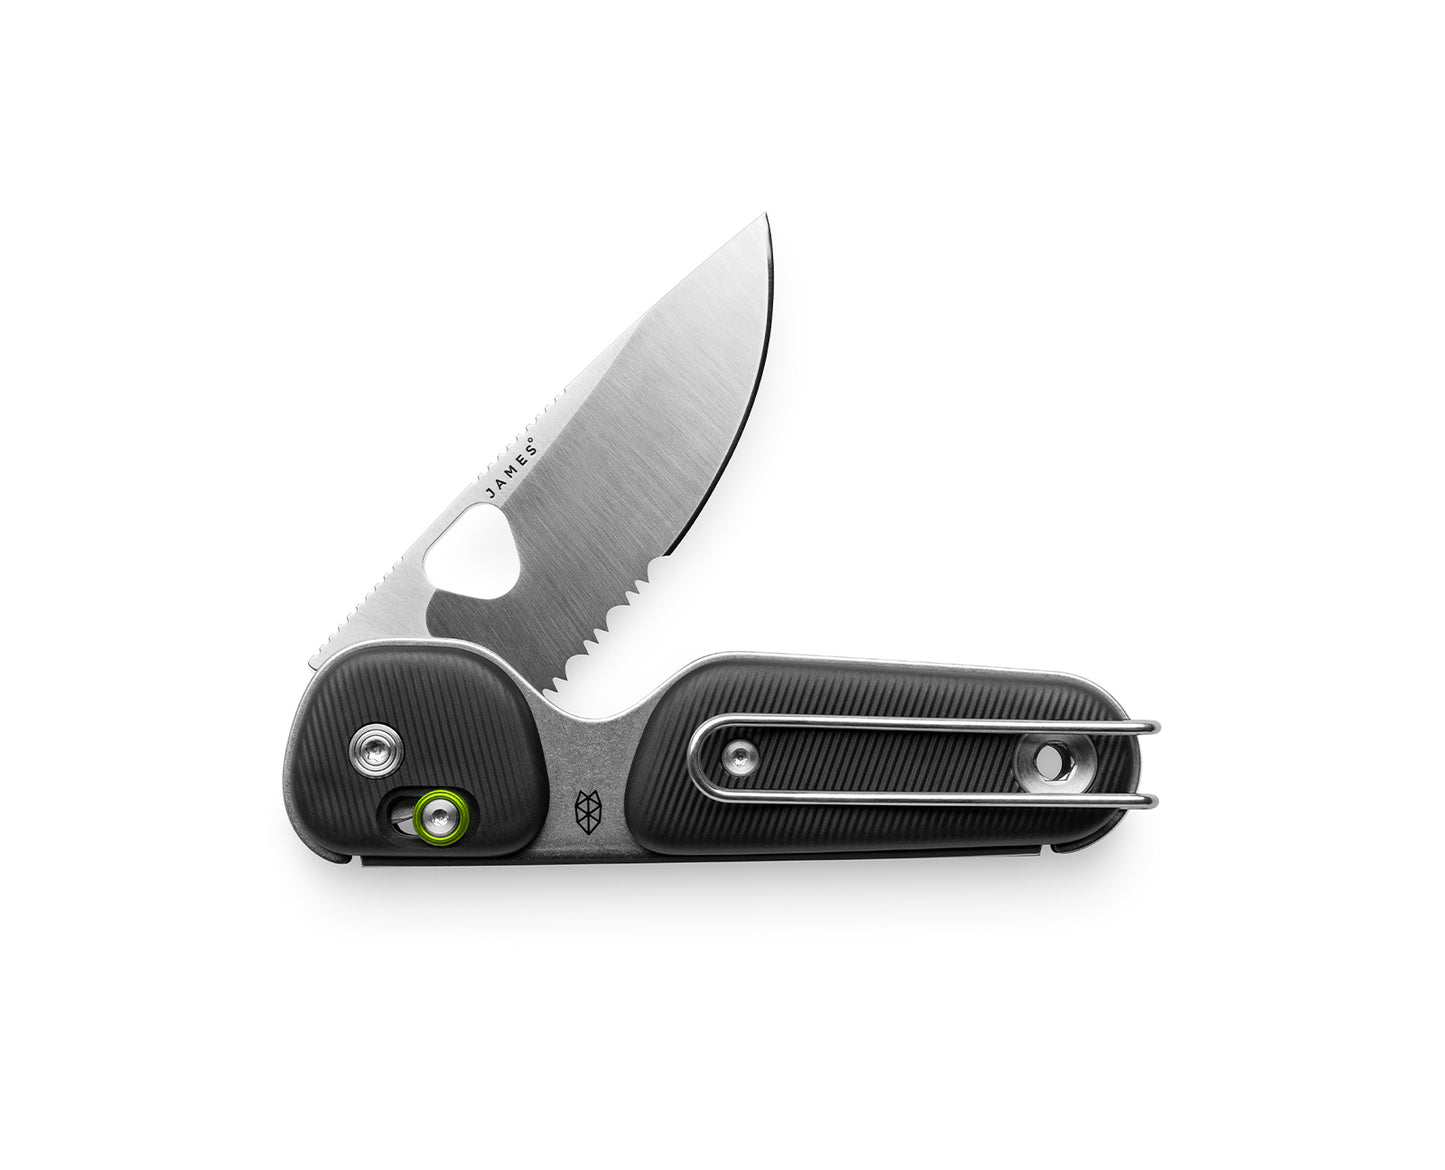 The Redstone knife with black handle and serrated, stainless steel blade.